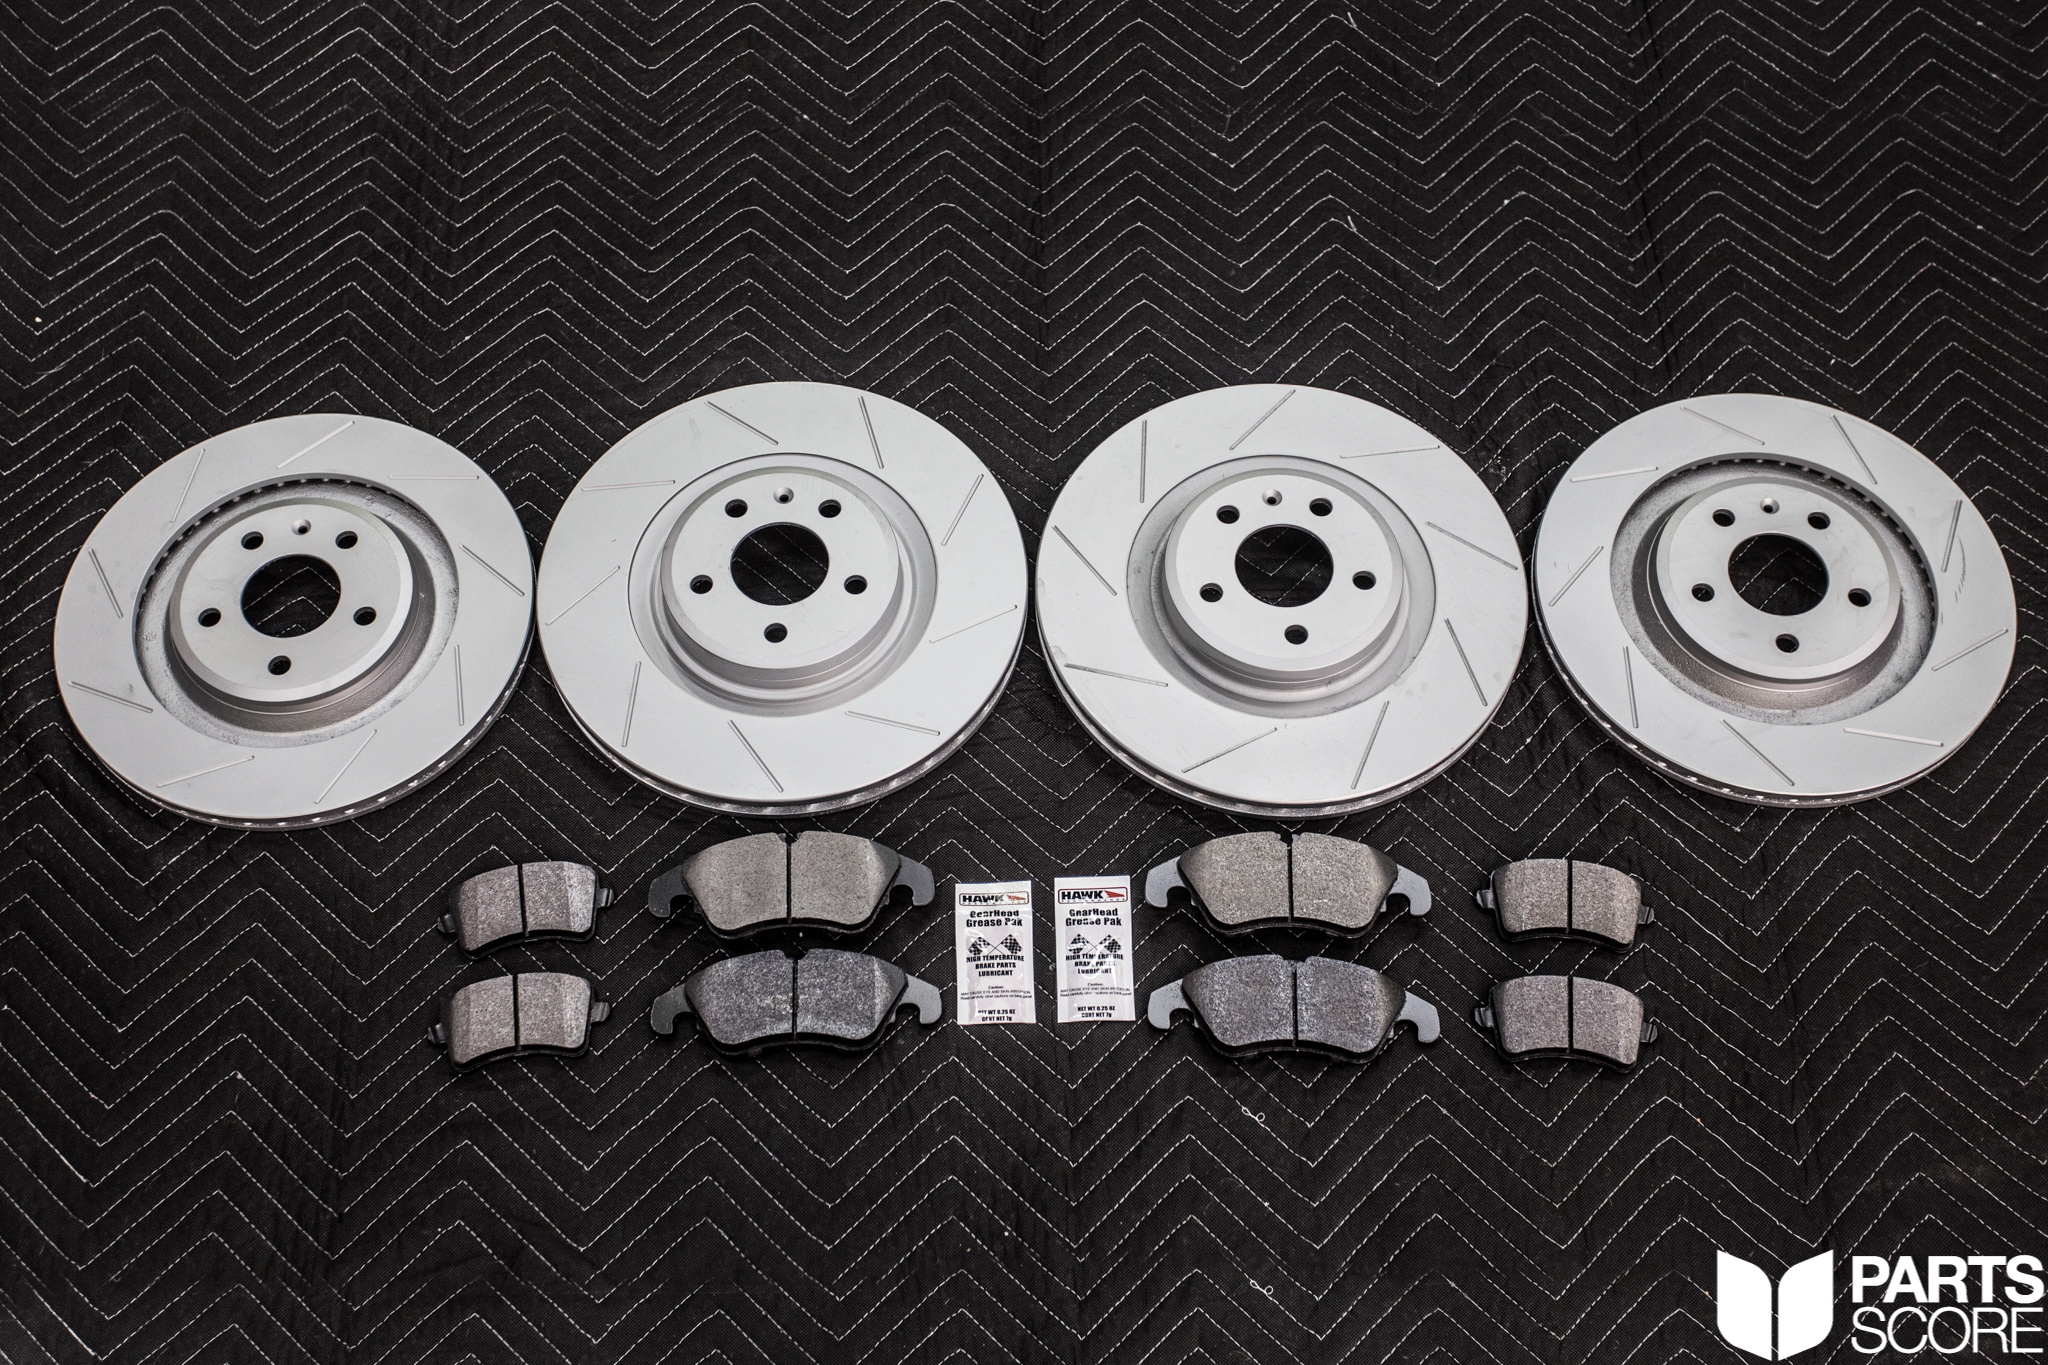 partsscore, audi, audis4, audis, s4, quattro, spacers, ecstuning, ecs tuning, giactuned, awetuning, spacer, spacers, ecstuning, supercharged, boost, pulleyupgrade